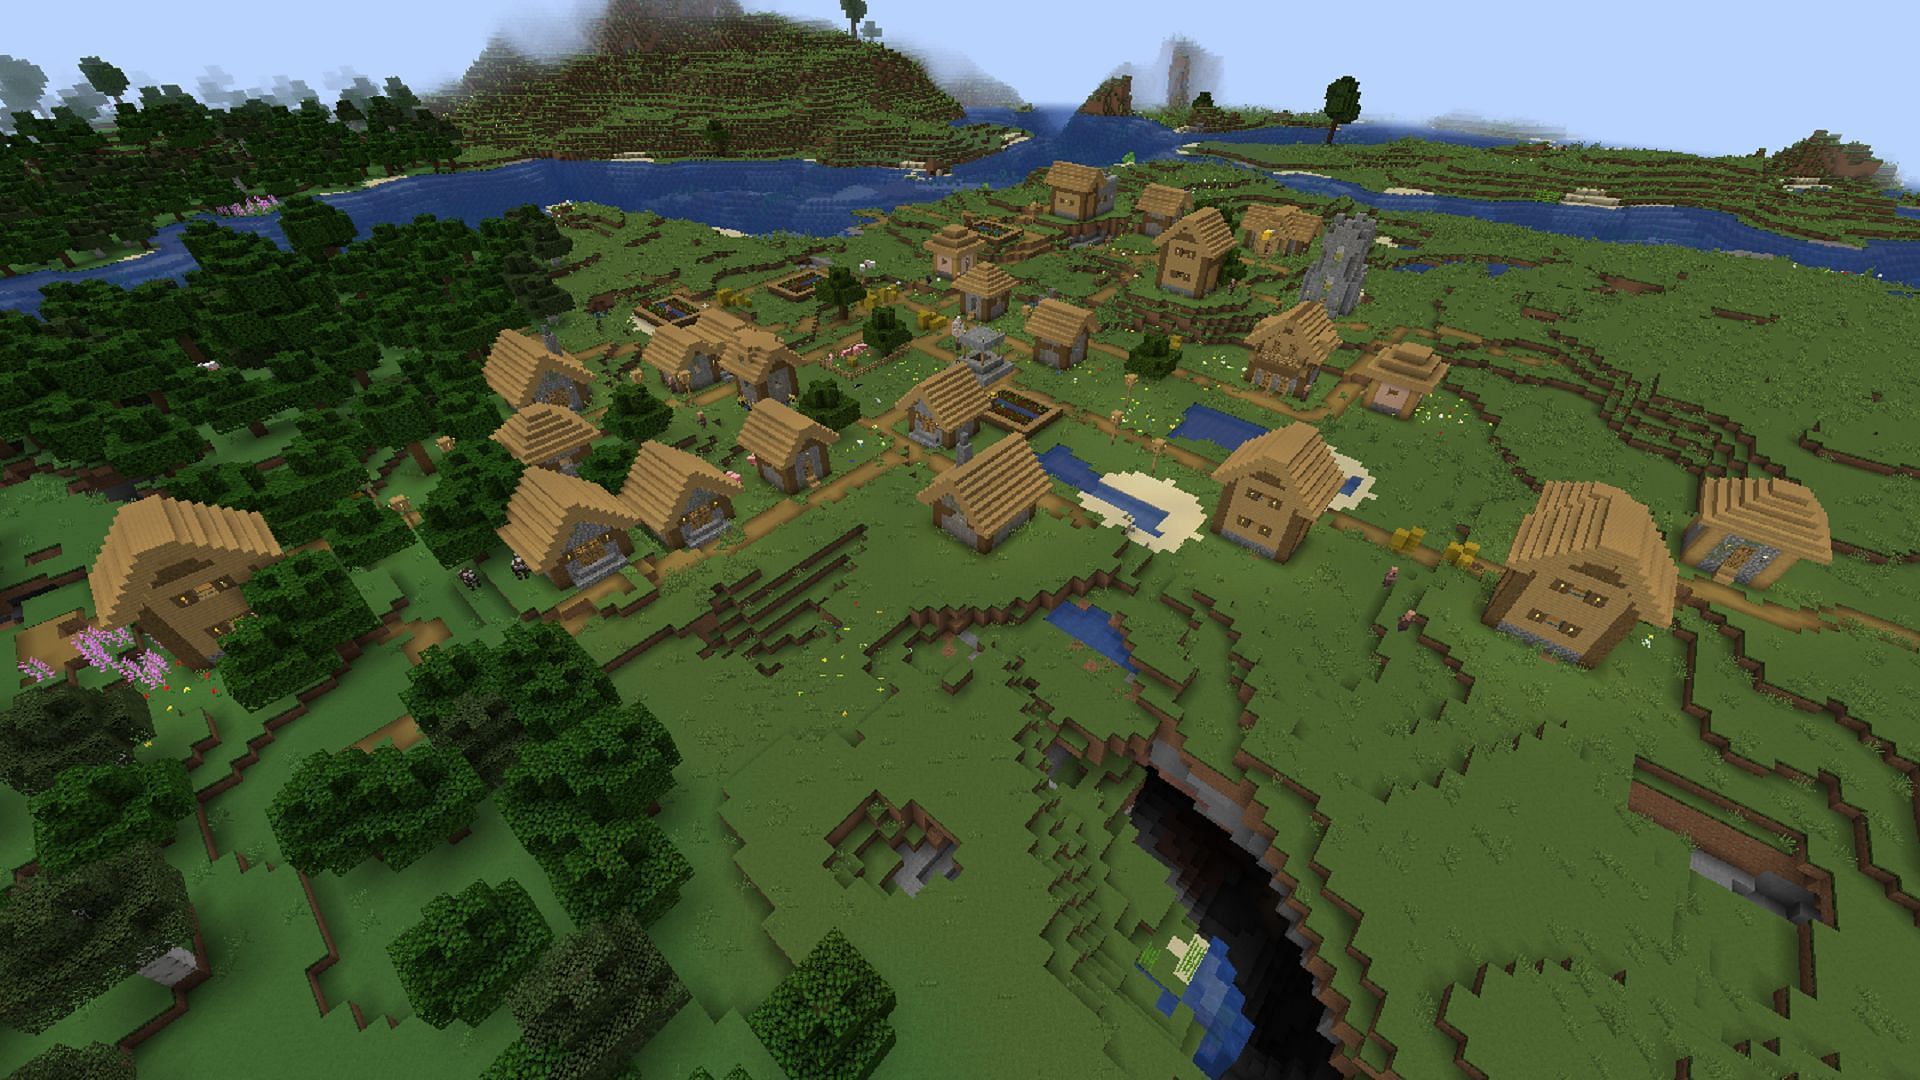 A very large Minecraft village awaits players not far from spawn in this seed (Image via Mojang)